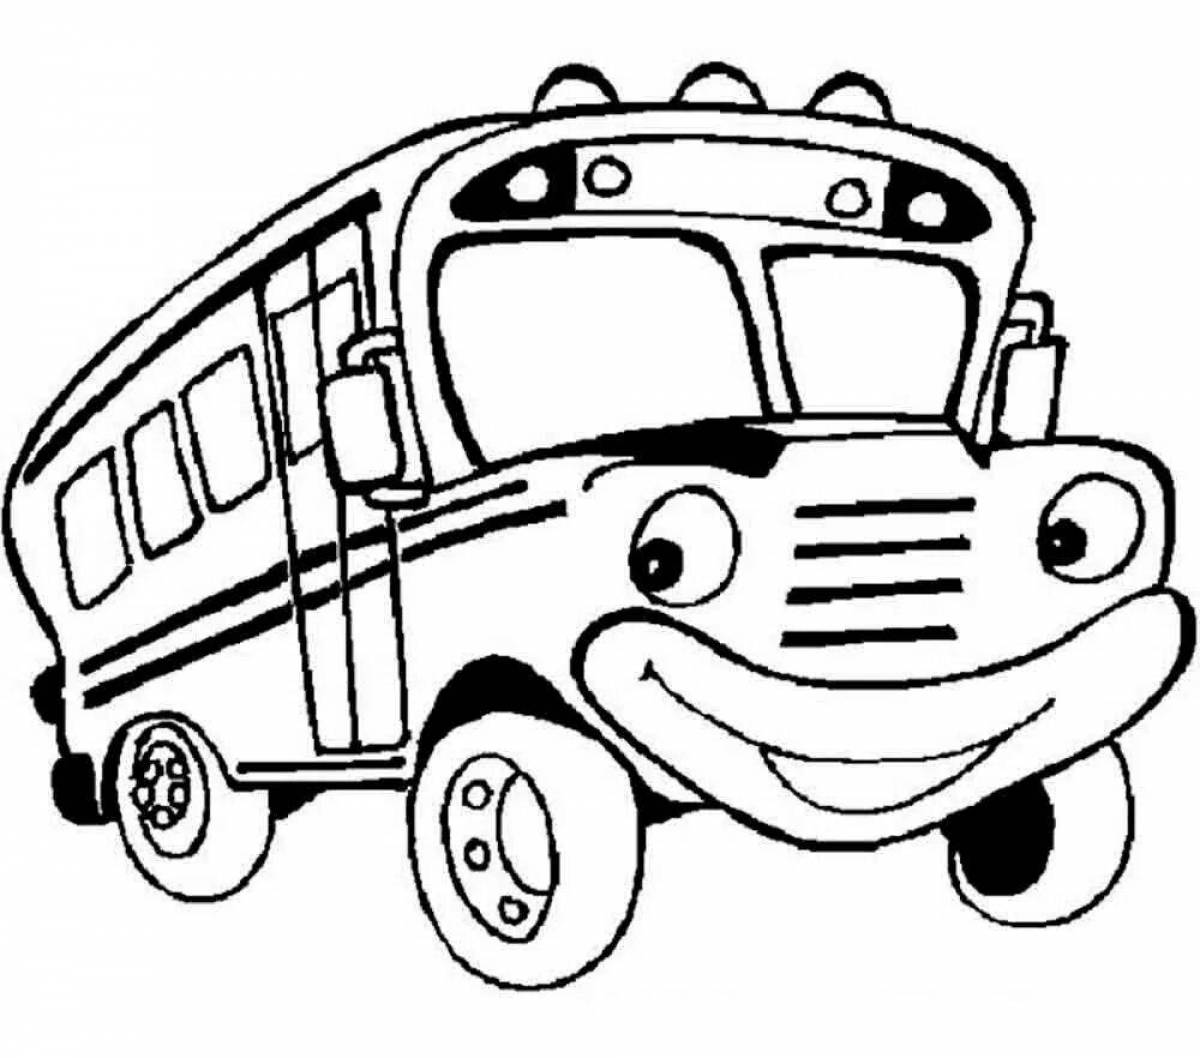 Colorful cars and buses coloring book